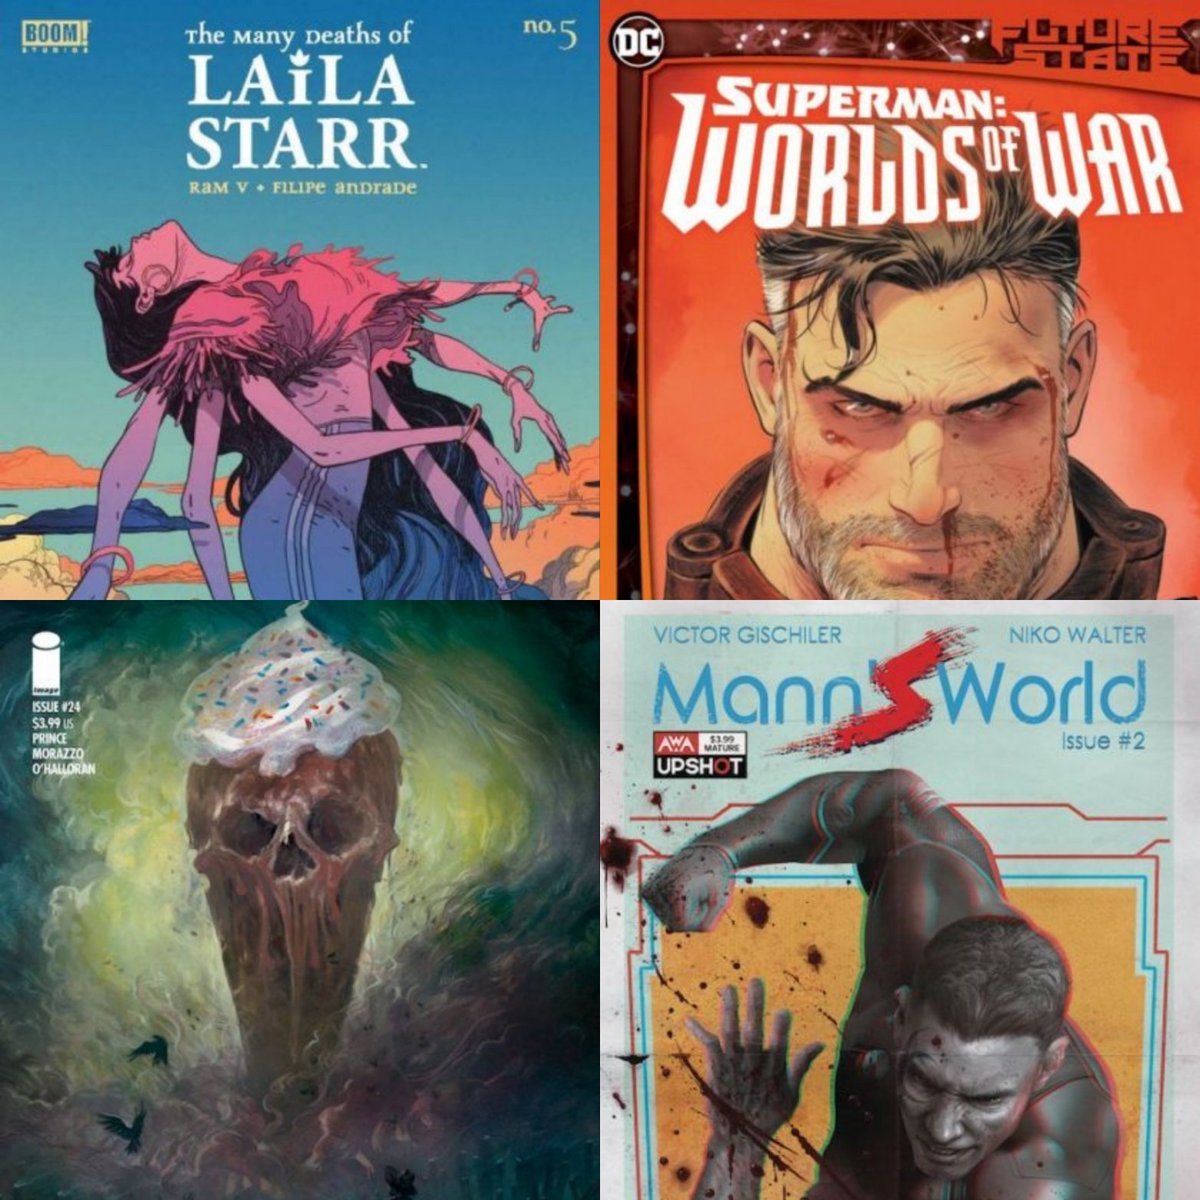 LNC Best of 2021 Nominees:
Best Single Issue

Many Deaths of Laila Starr 5 @therightram
FS Superman World's of War 2 @PhillipKJohnson
Ice Cream Man 24 #wmaxwellprince
Manns World 2 @VictorGischler
Voting is open: s.surveyplanet.com/5oqey0bb

Please RT & support these creators!